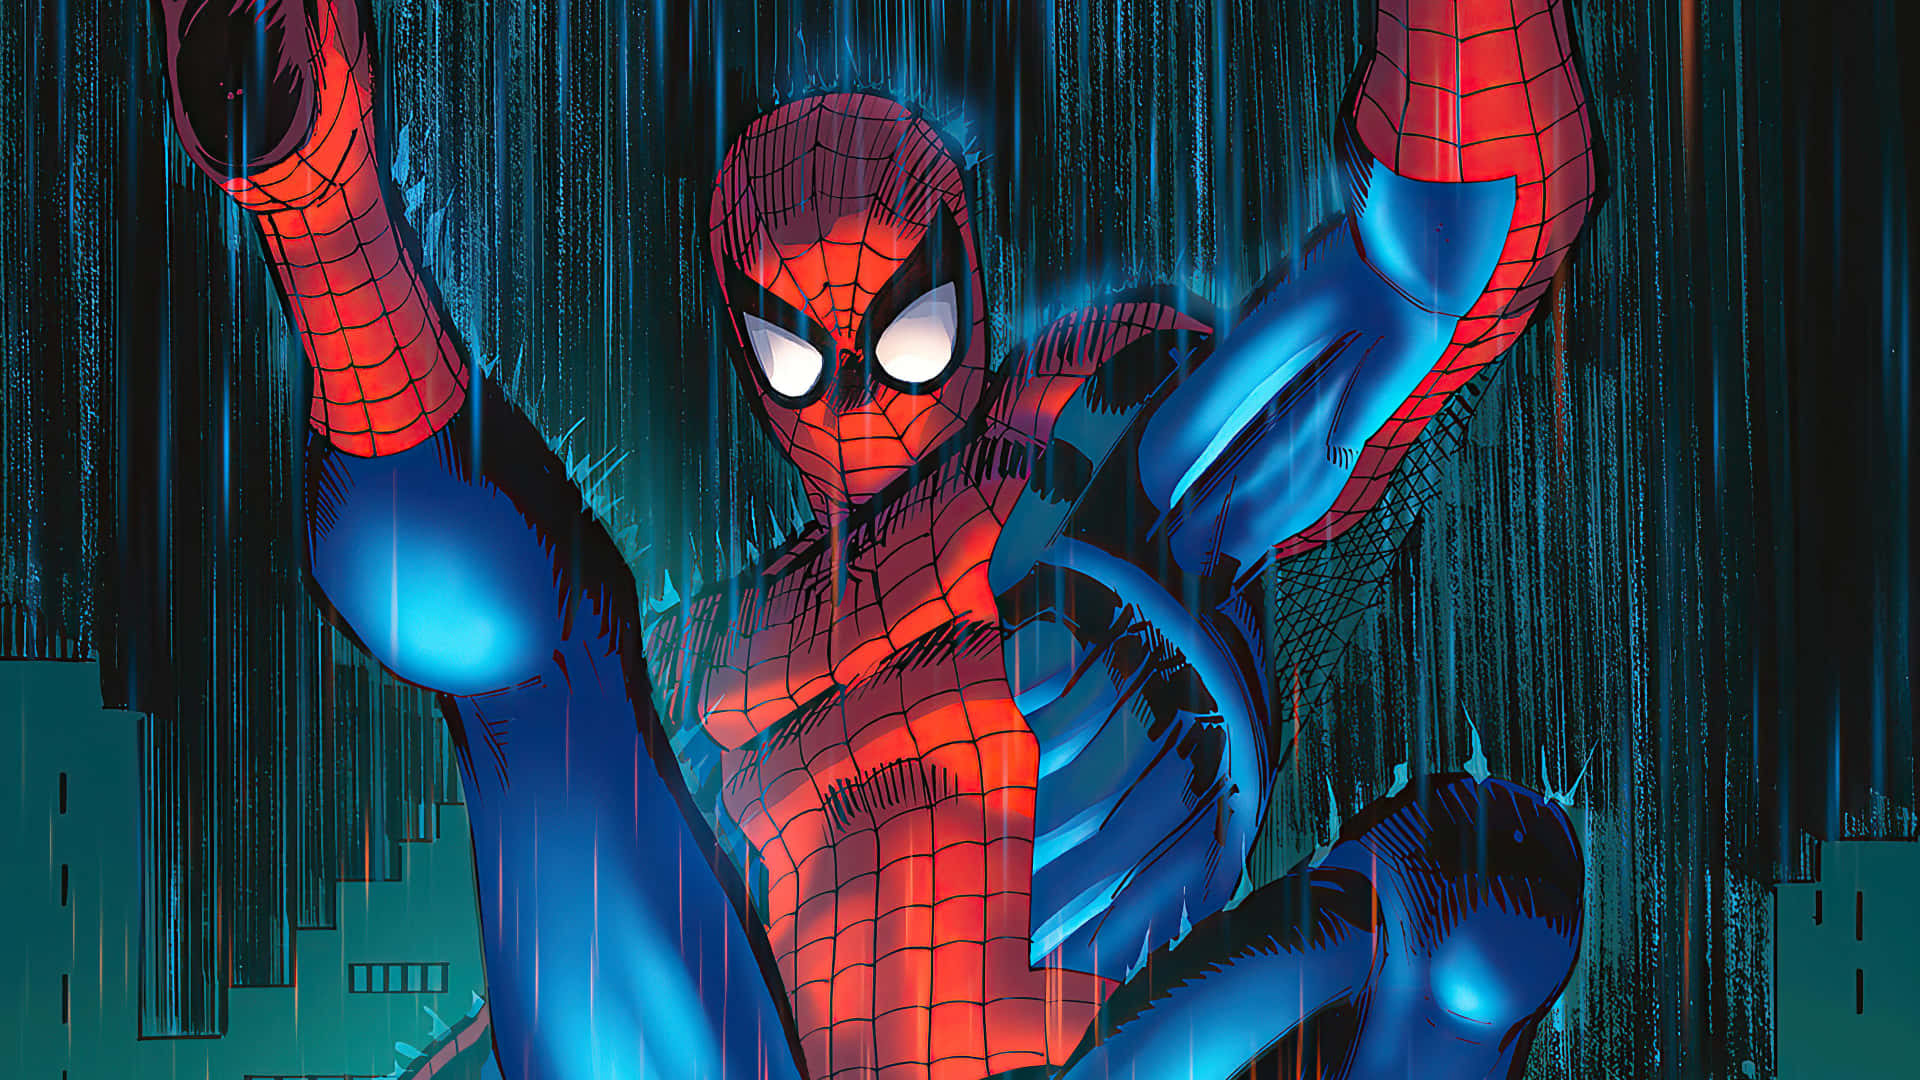 Spider-Man in Blue Suit Swinging Through The City Wallpaper